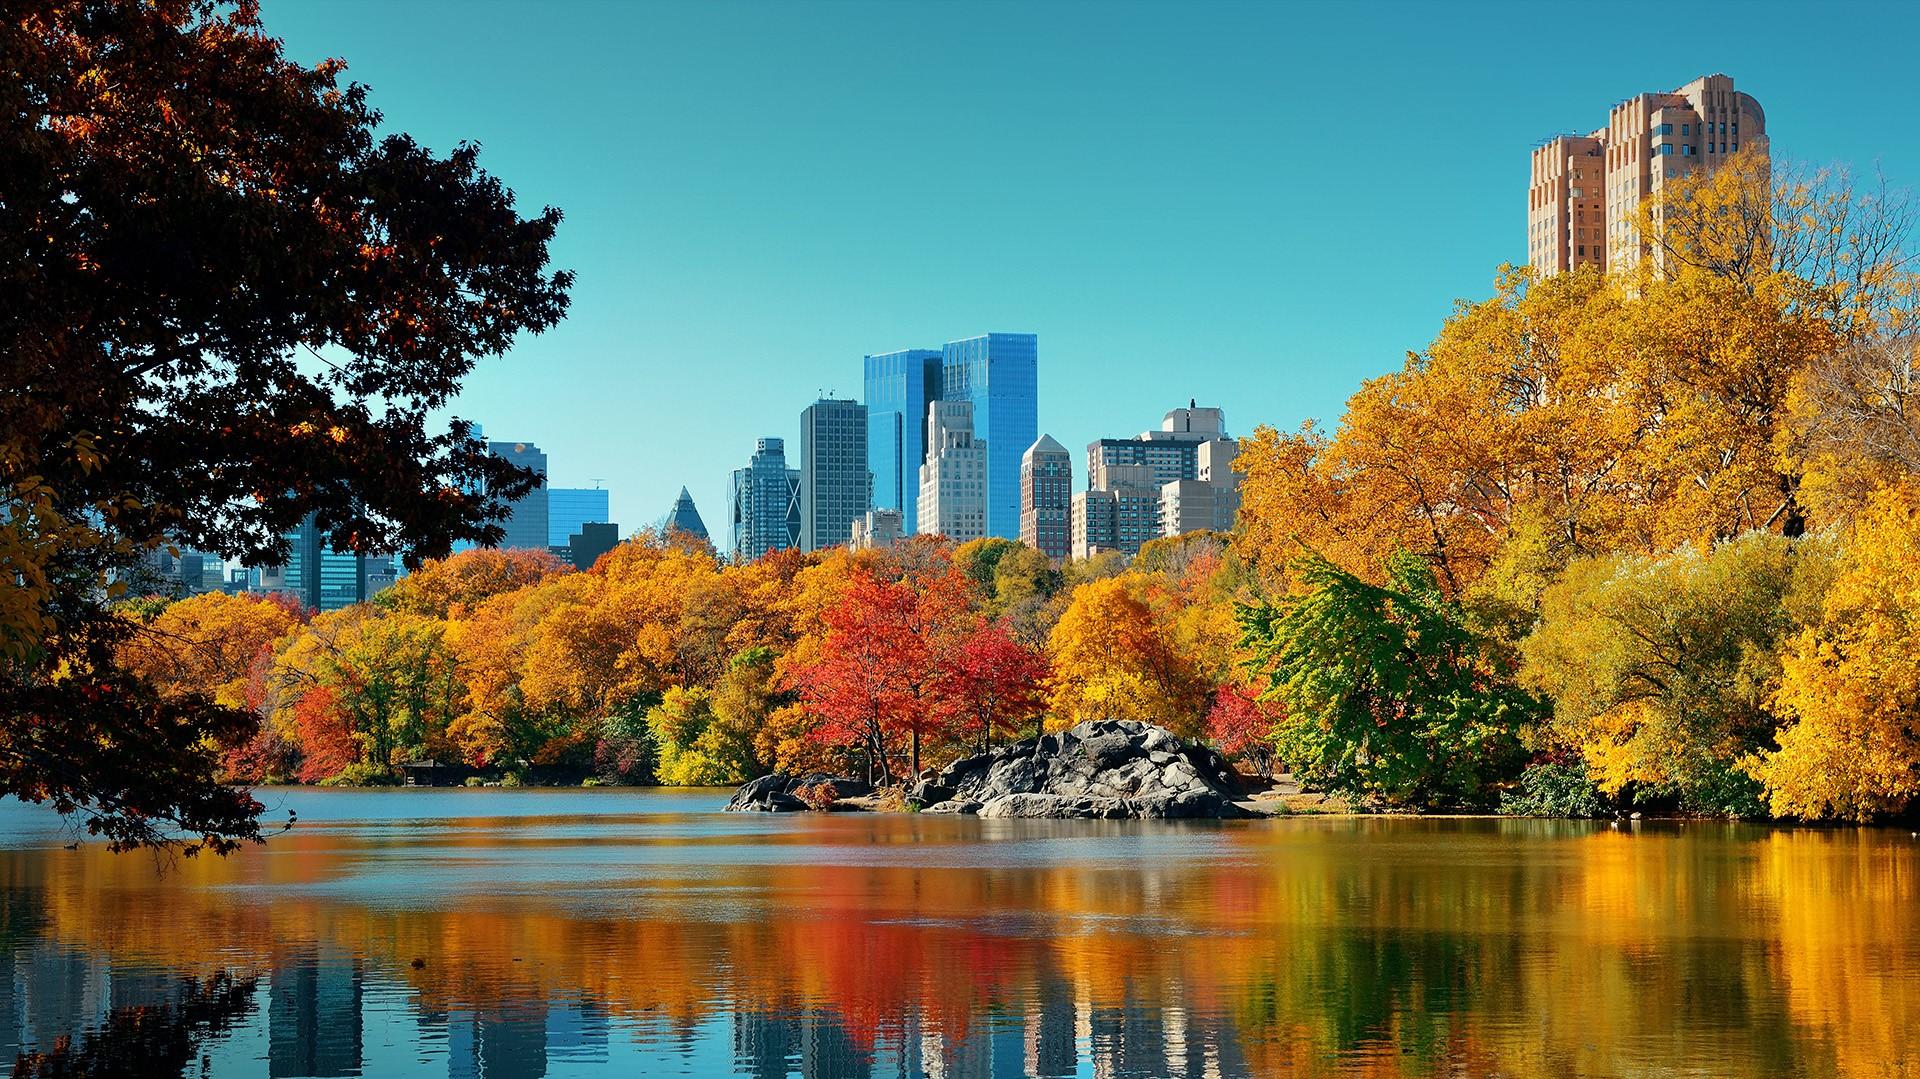 Central Park Autumn And Buildings Reflection In Midtown Manhattan